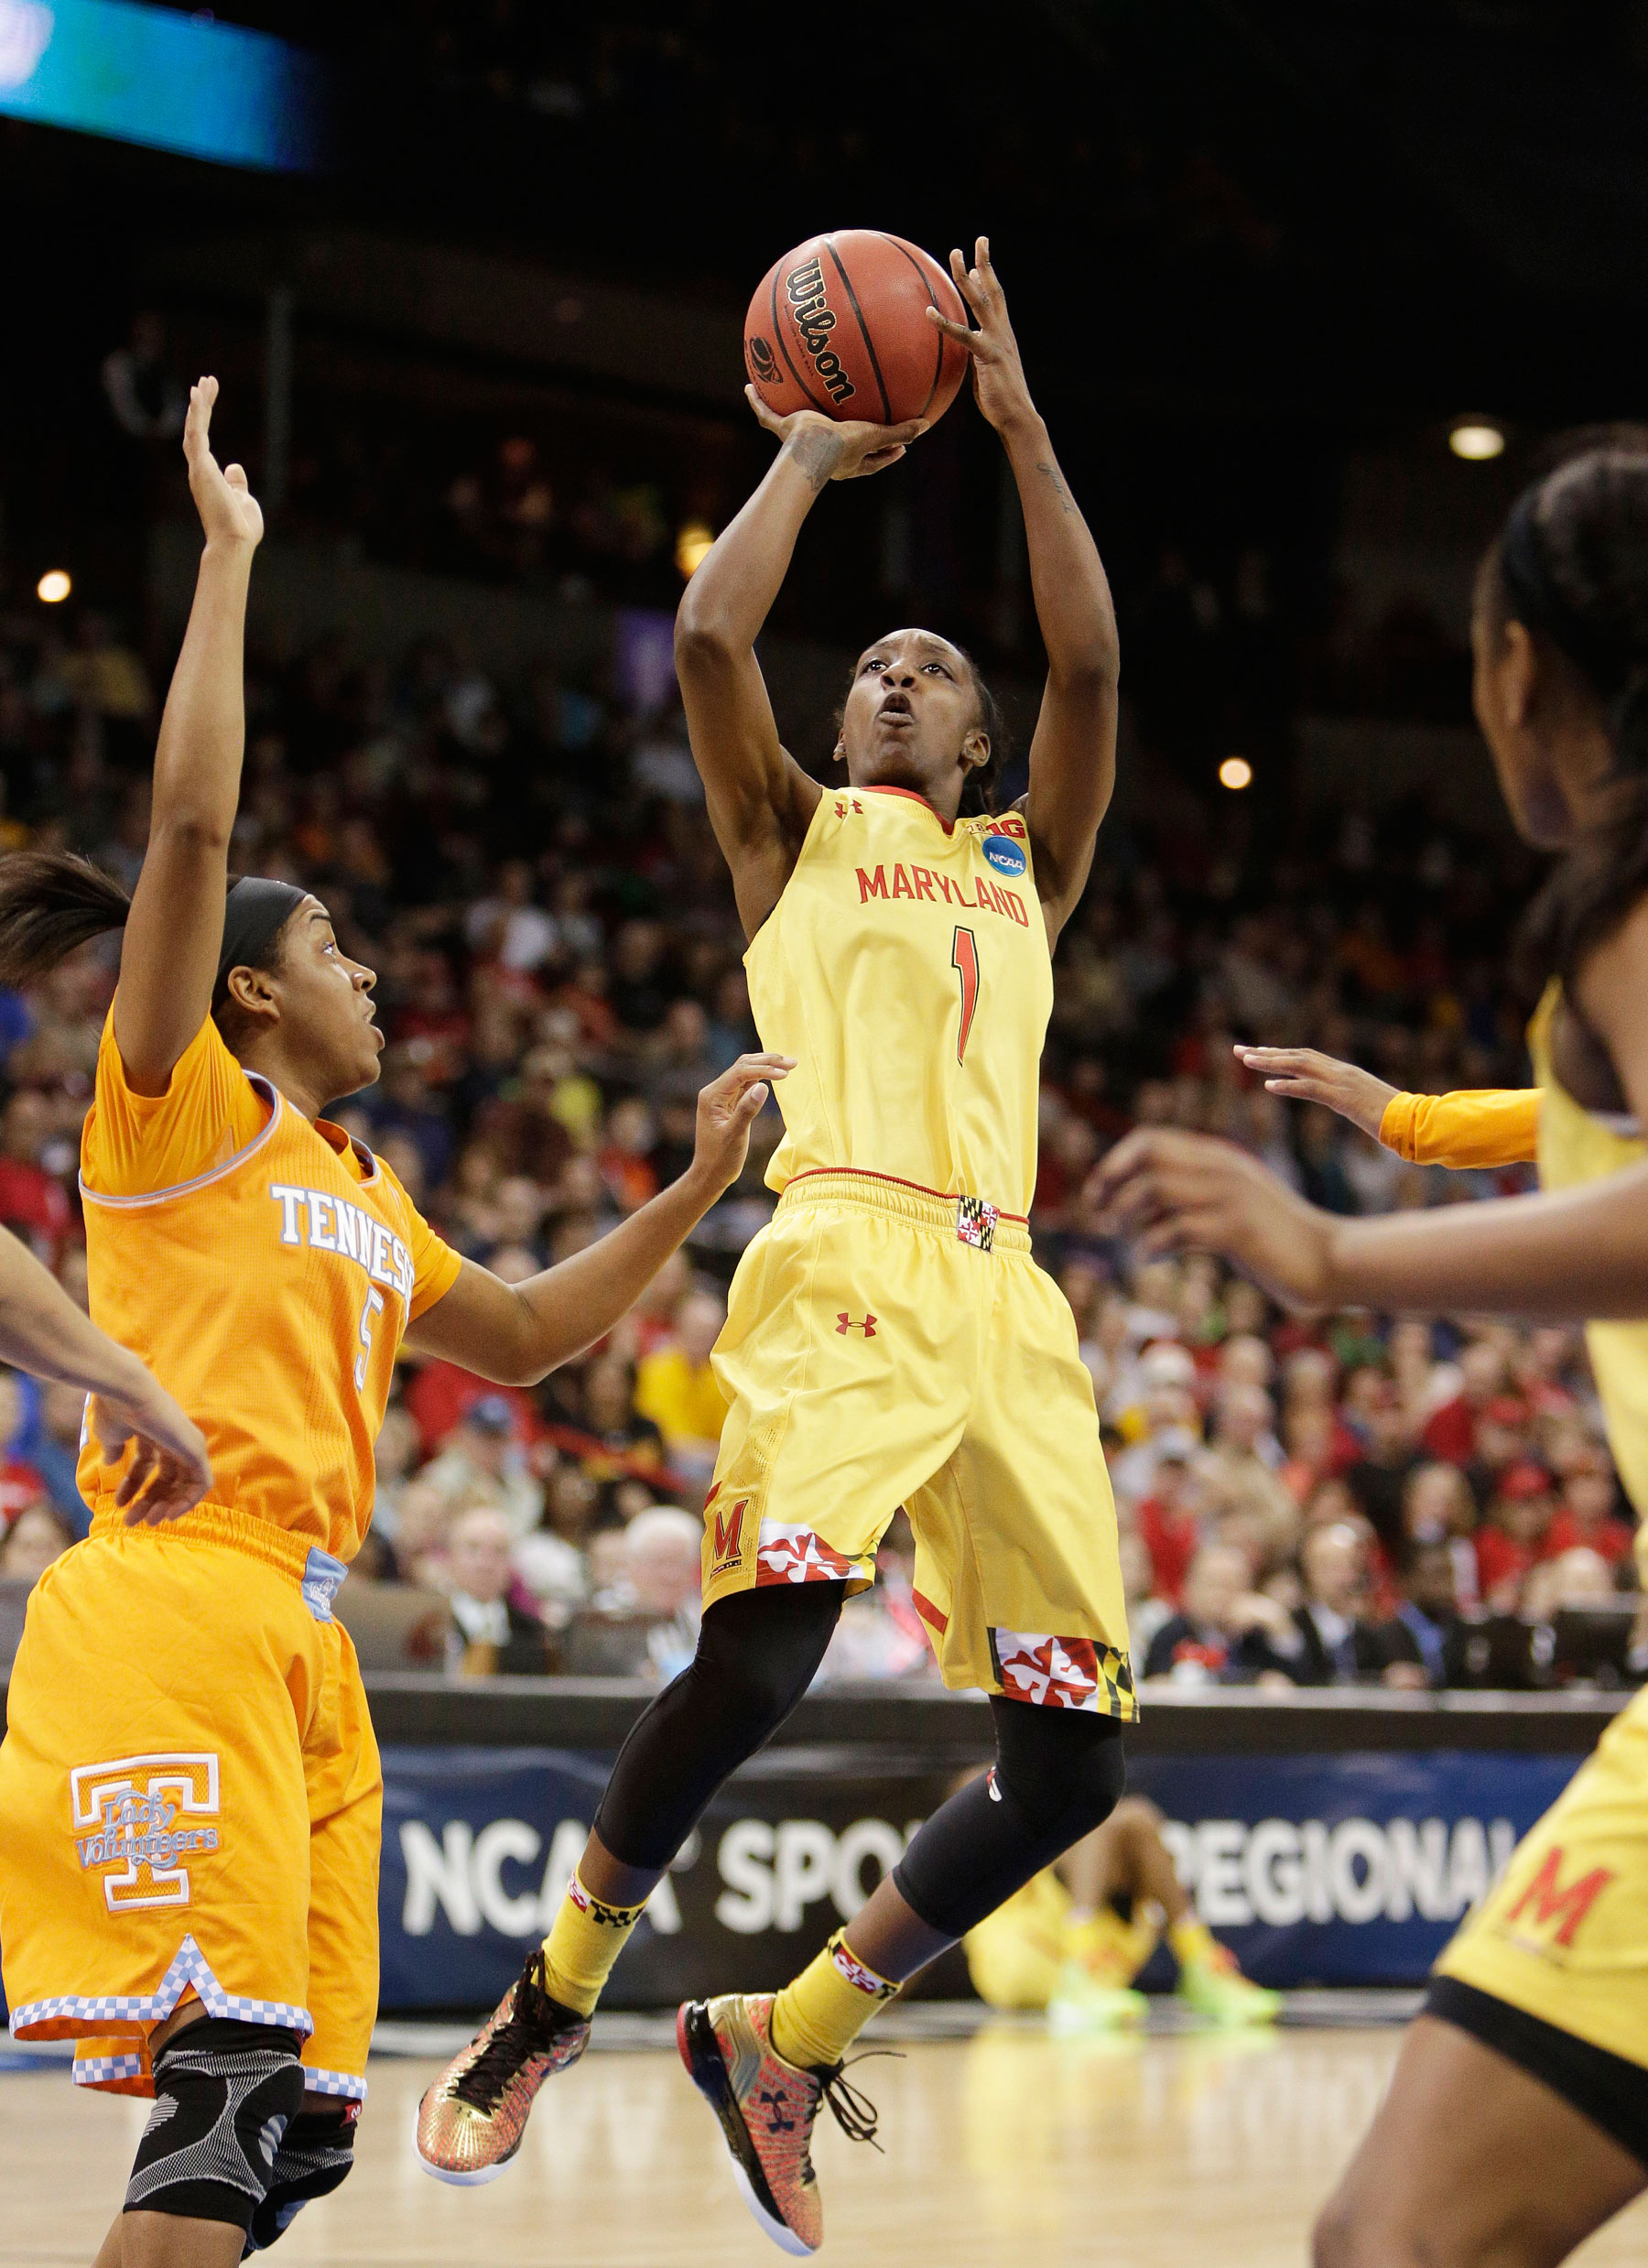 Maryland women top Tennessee, head to Final Four